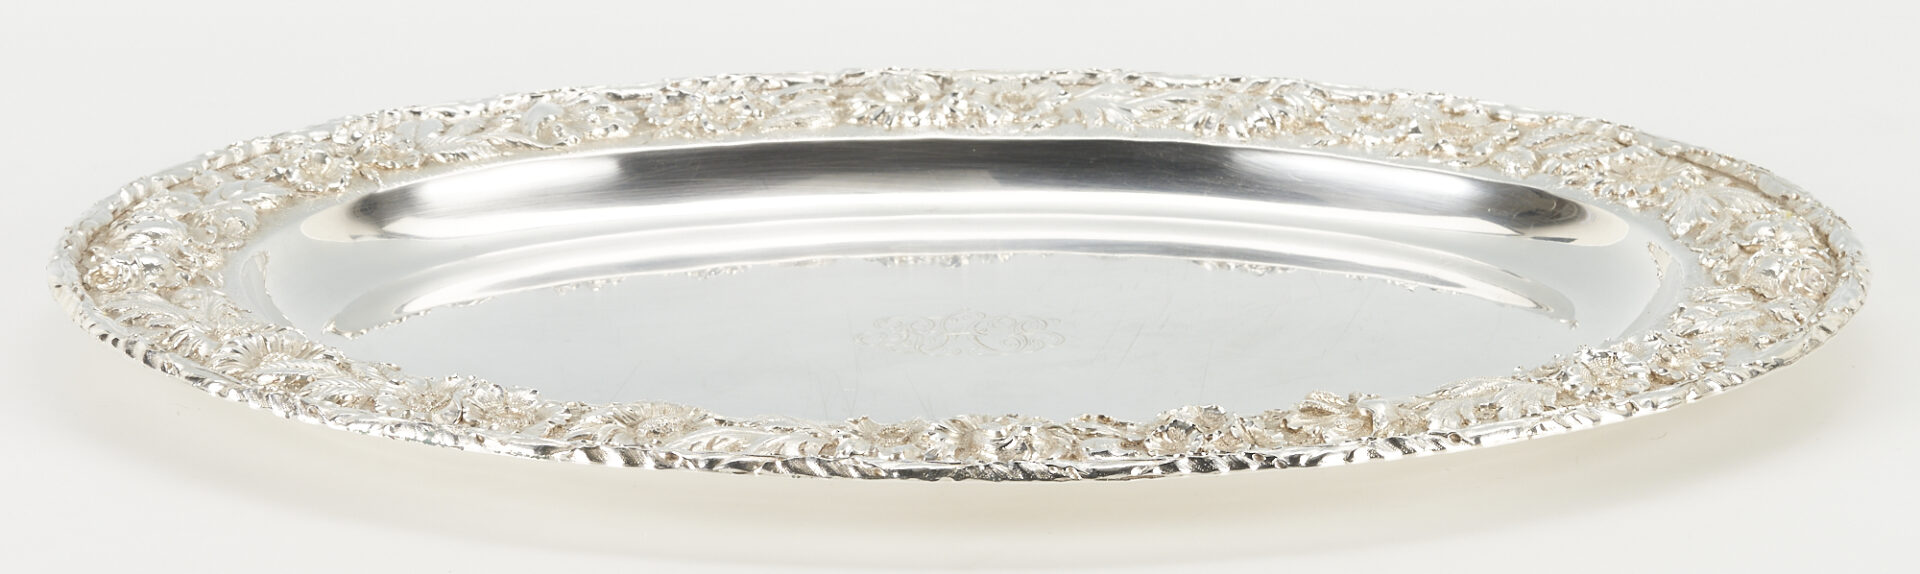 Lot 49: Kirk Repousse Sterling Silver Oval Tray, 19", Hand Decorated